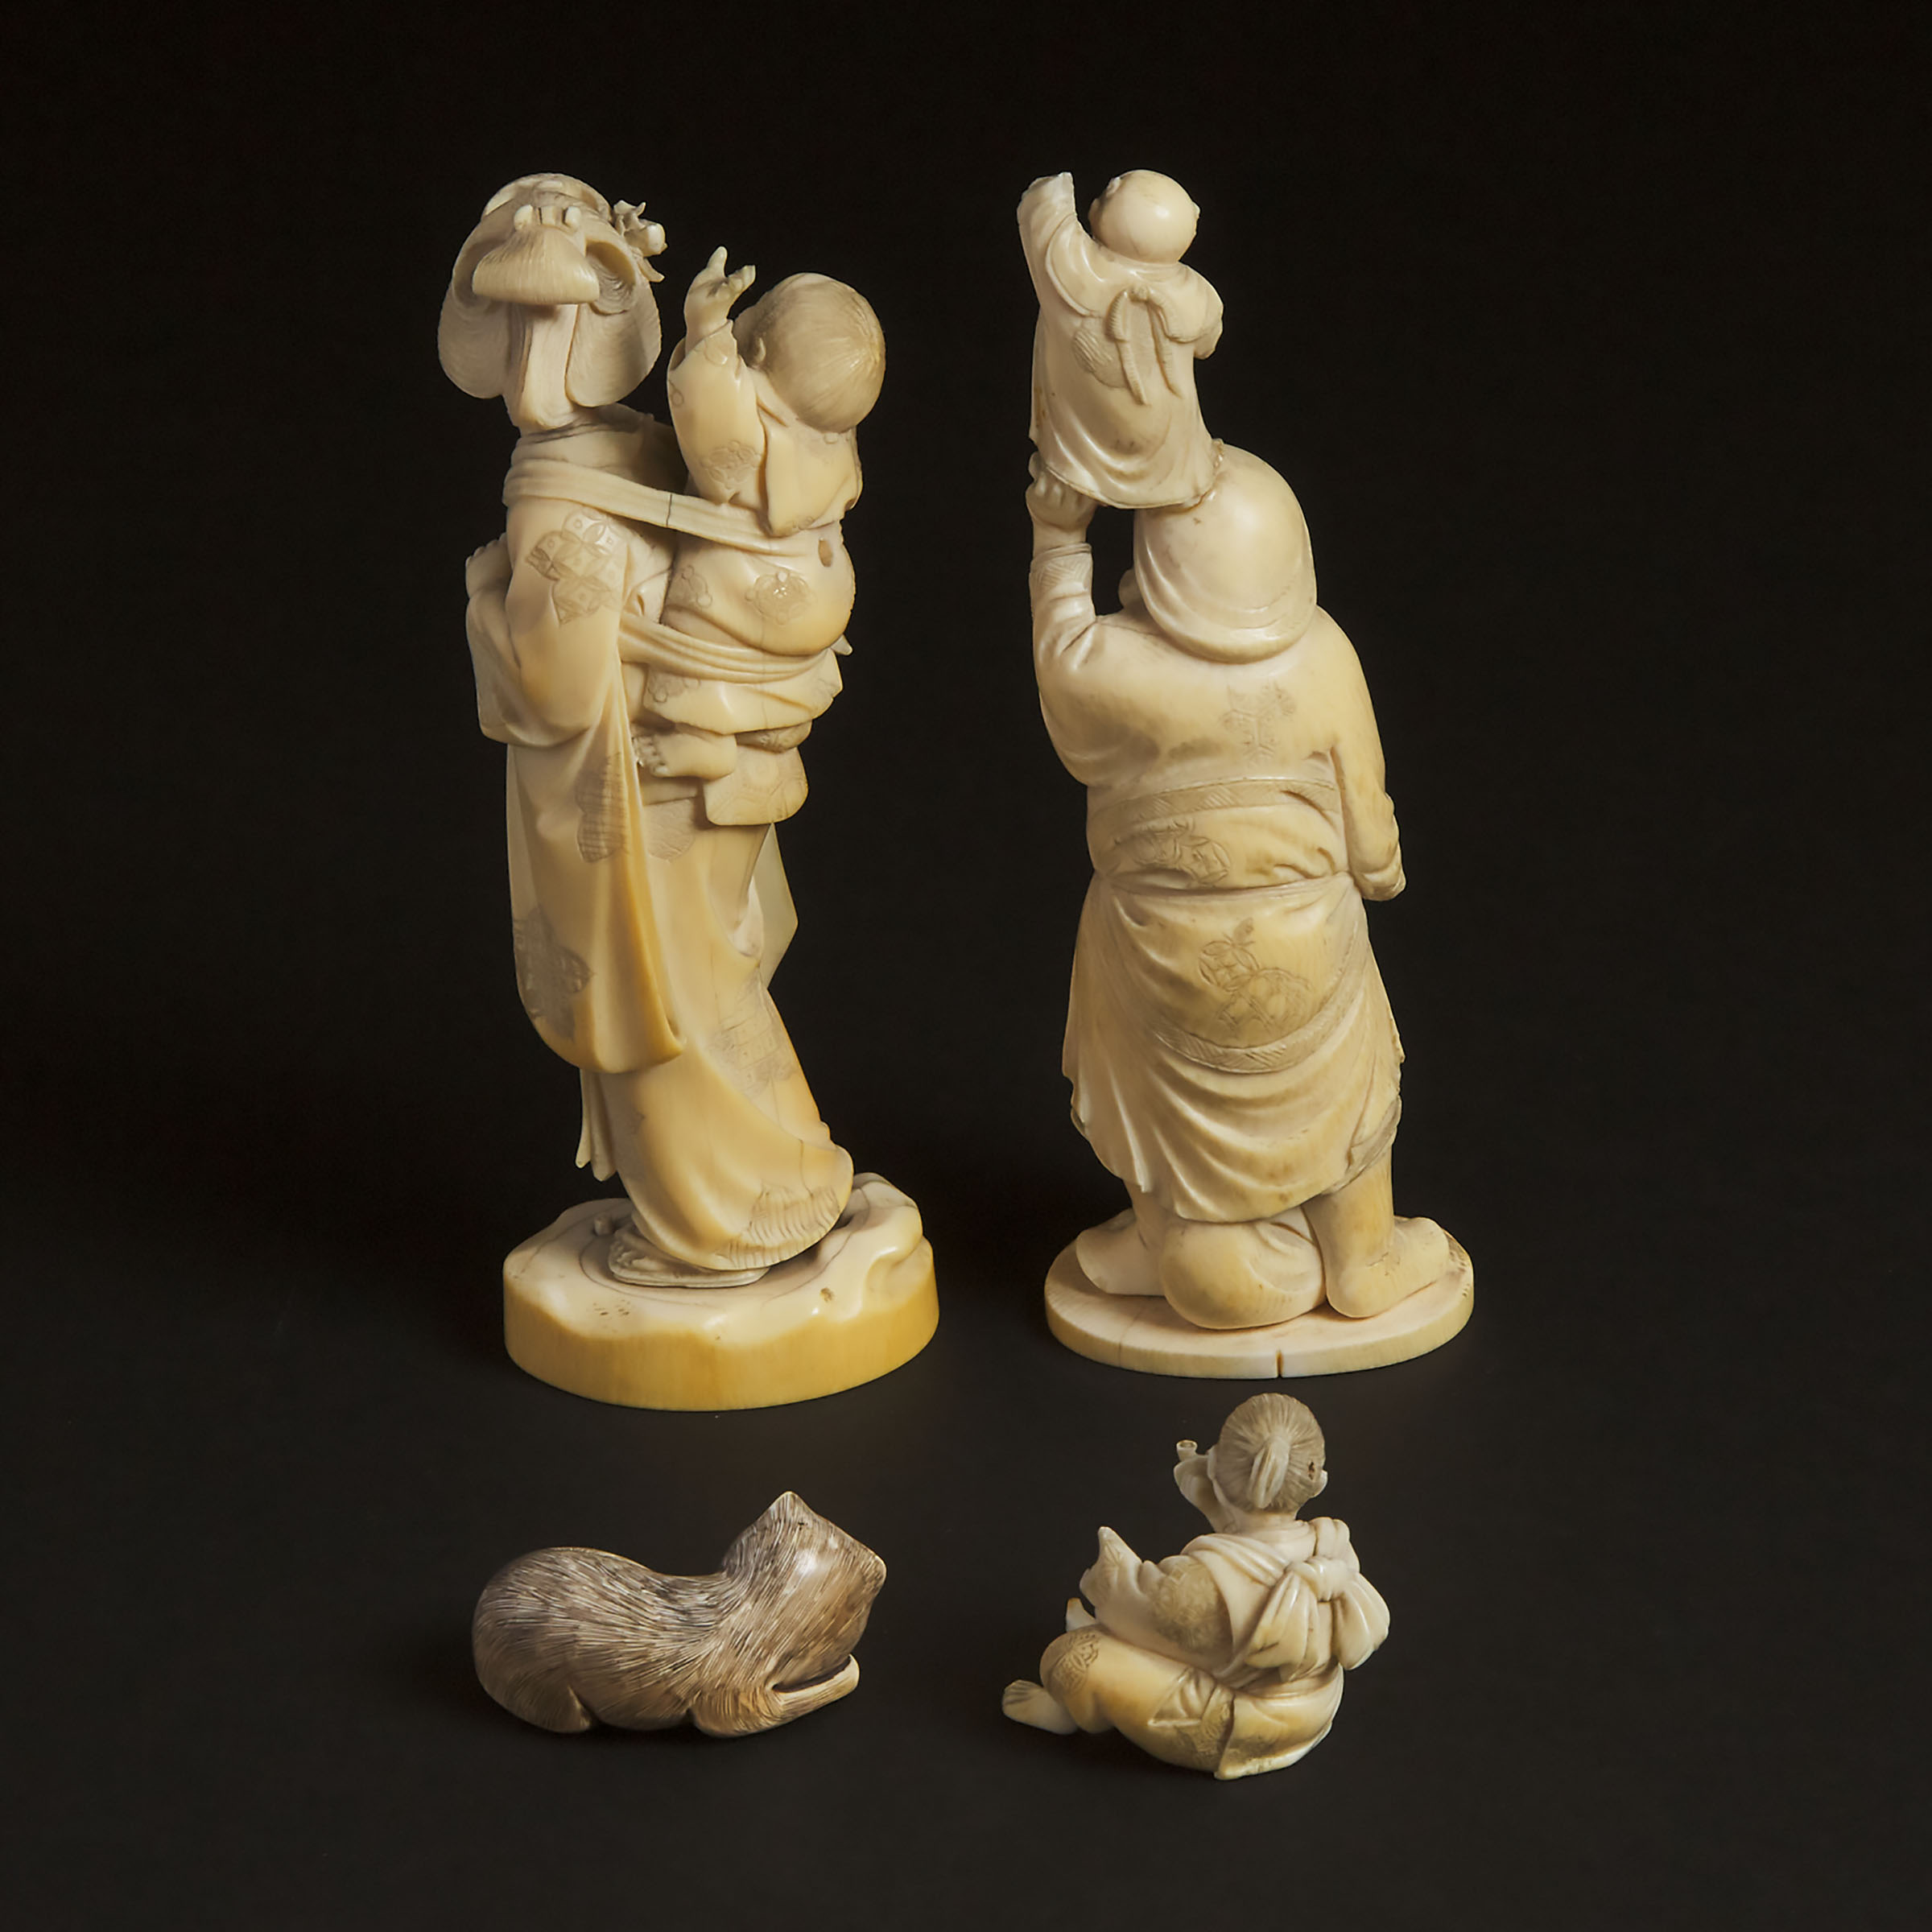 A Group of Four Japanese Ivory Carvings, Meiji Period